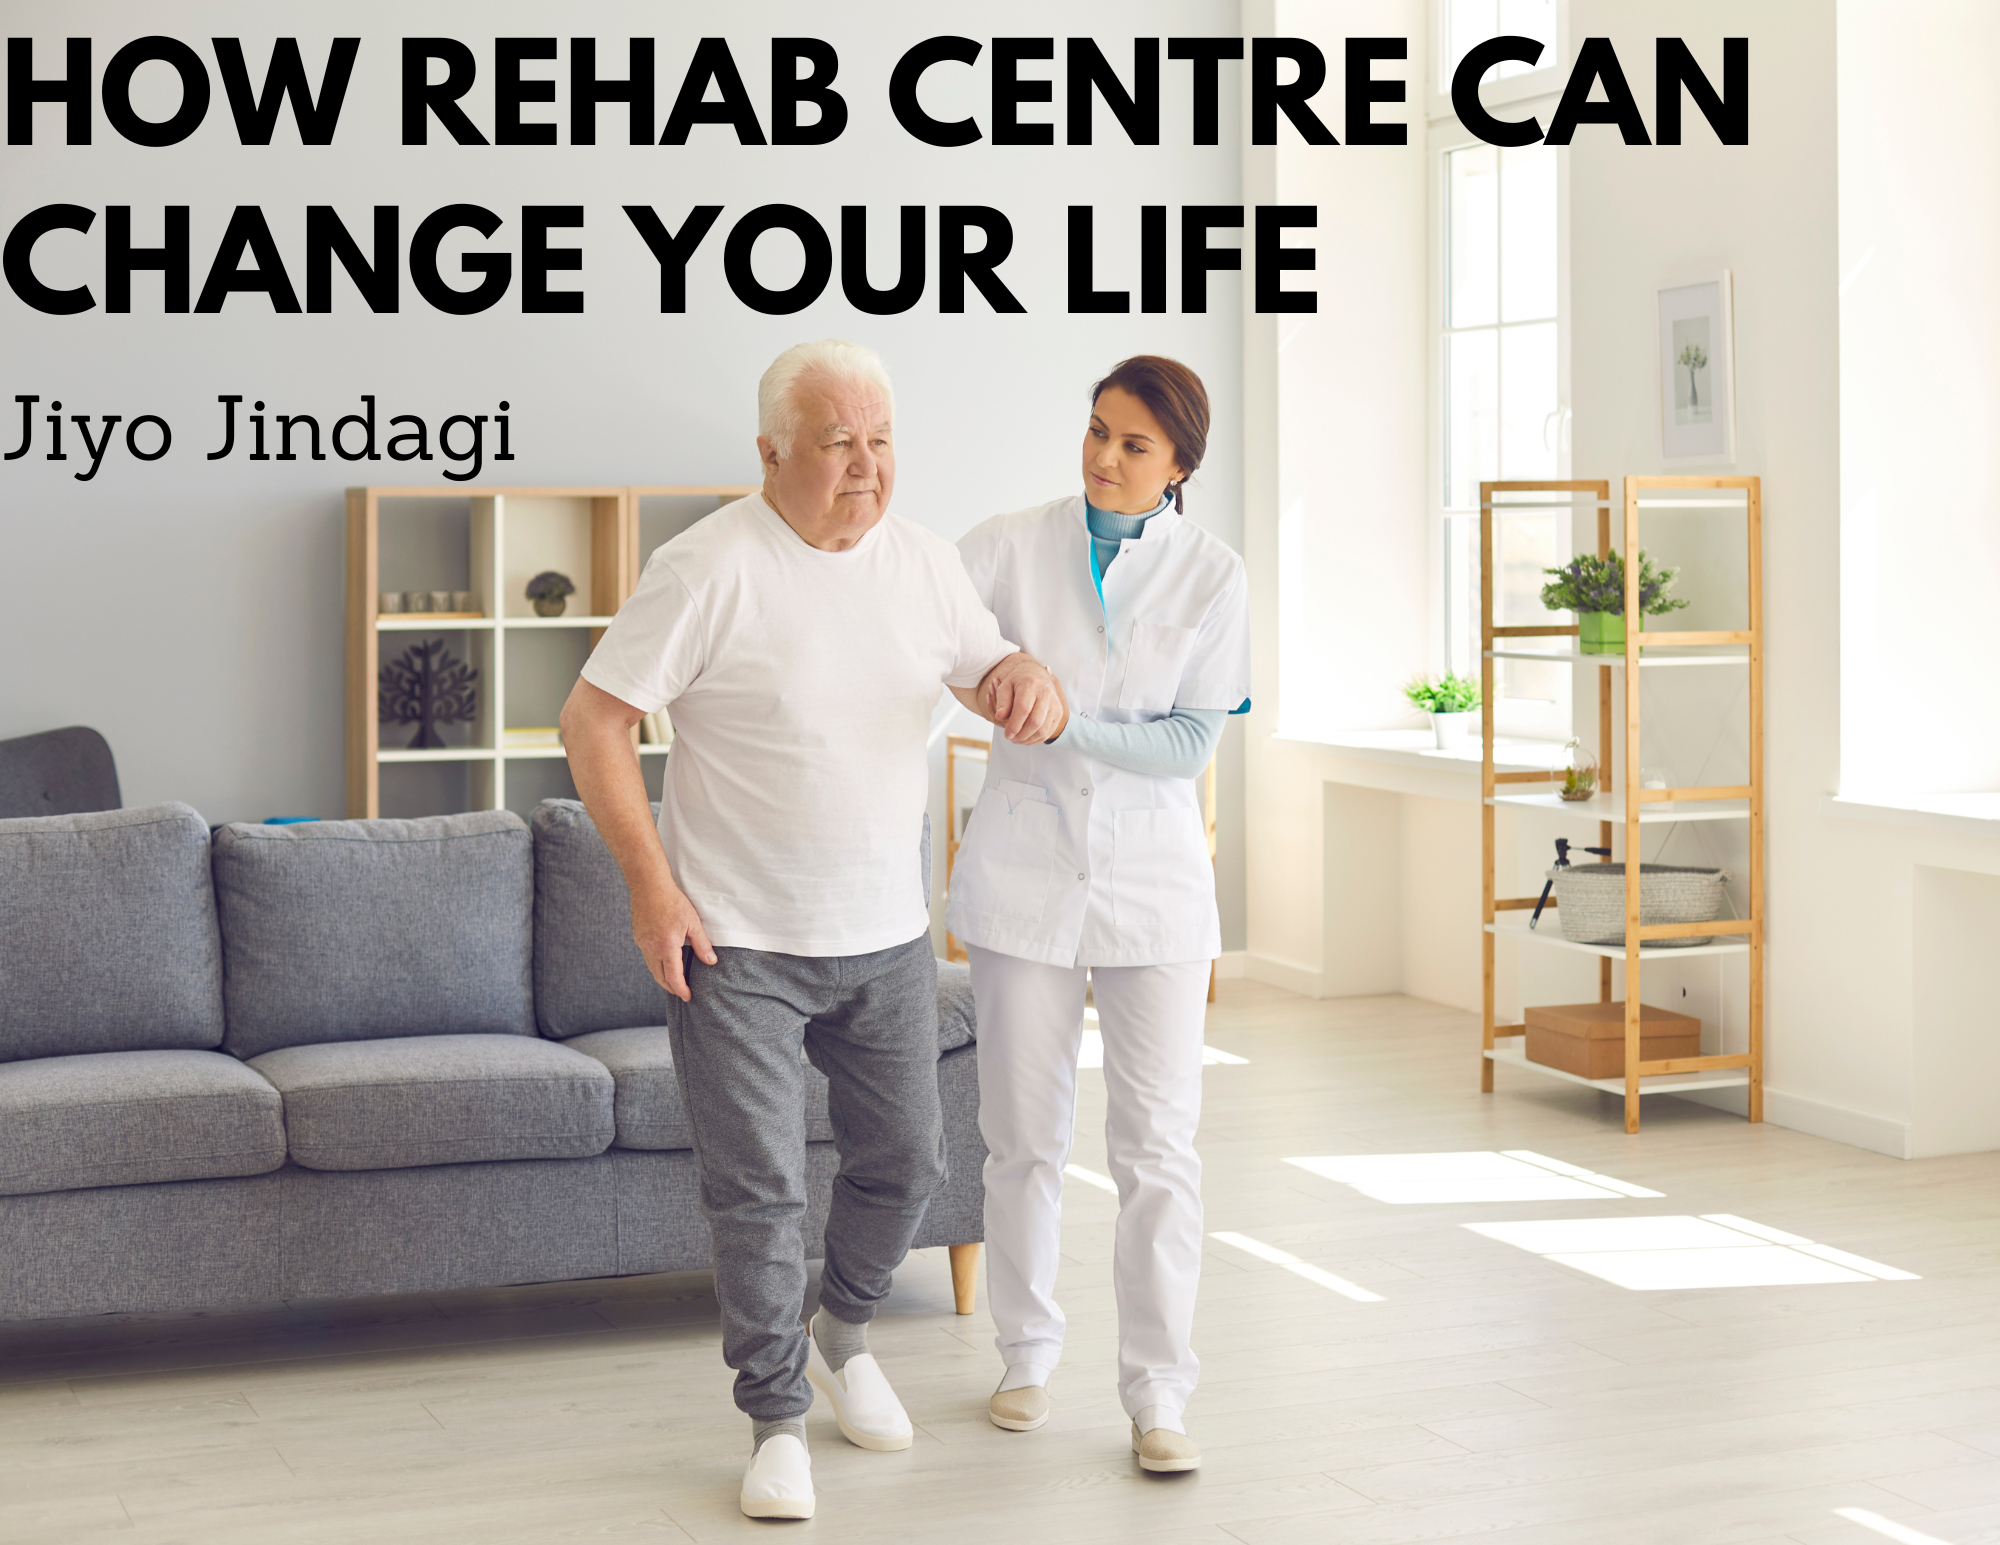 How Rehab Centre can change your life